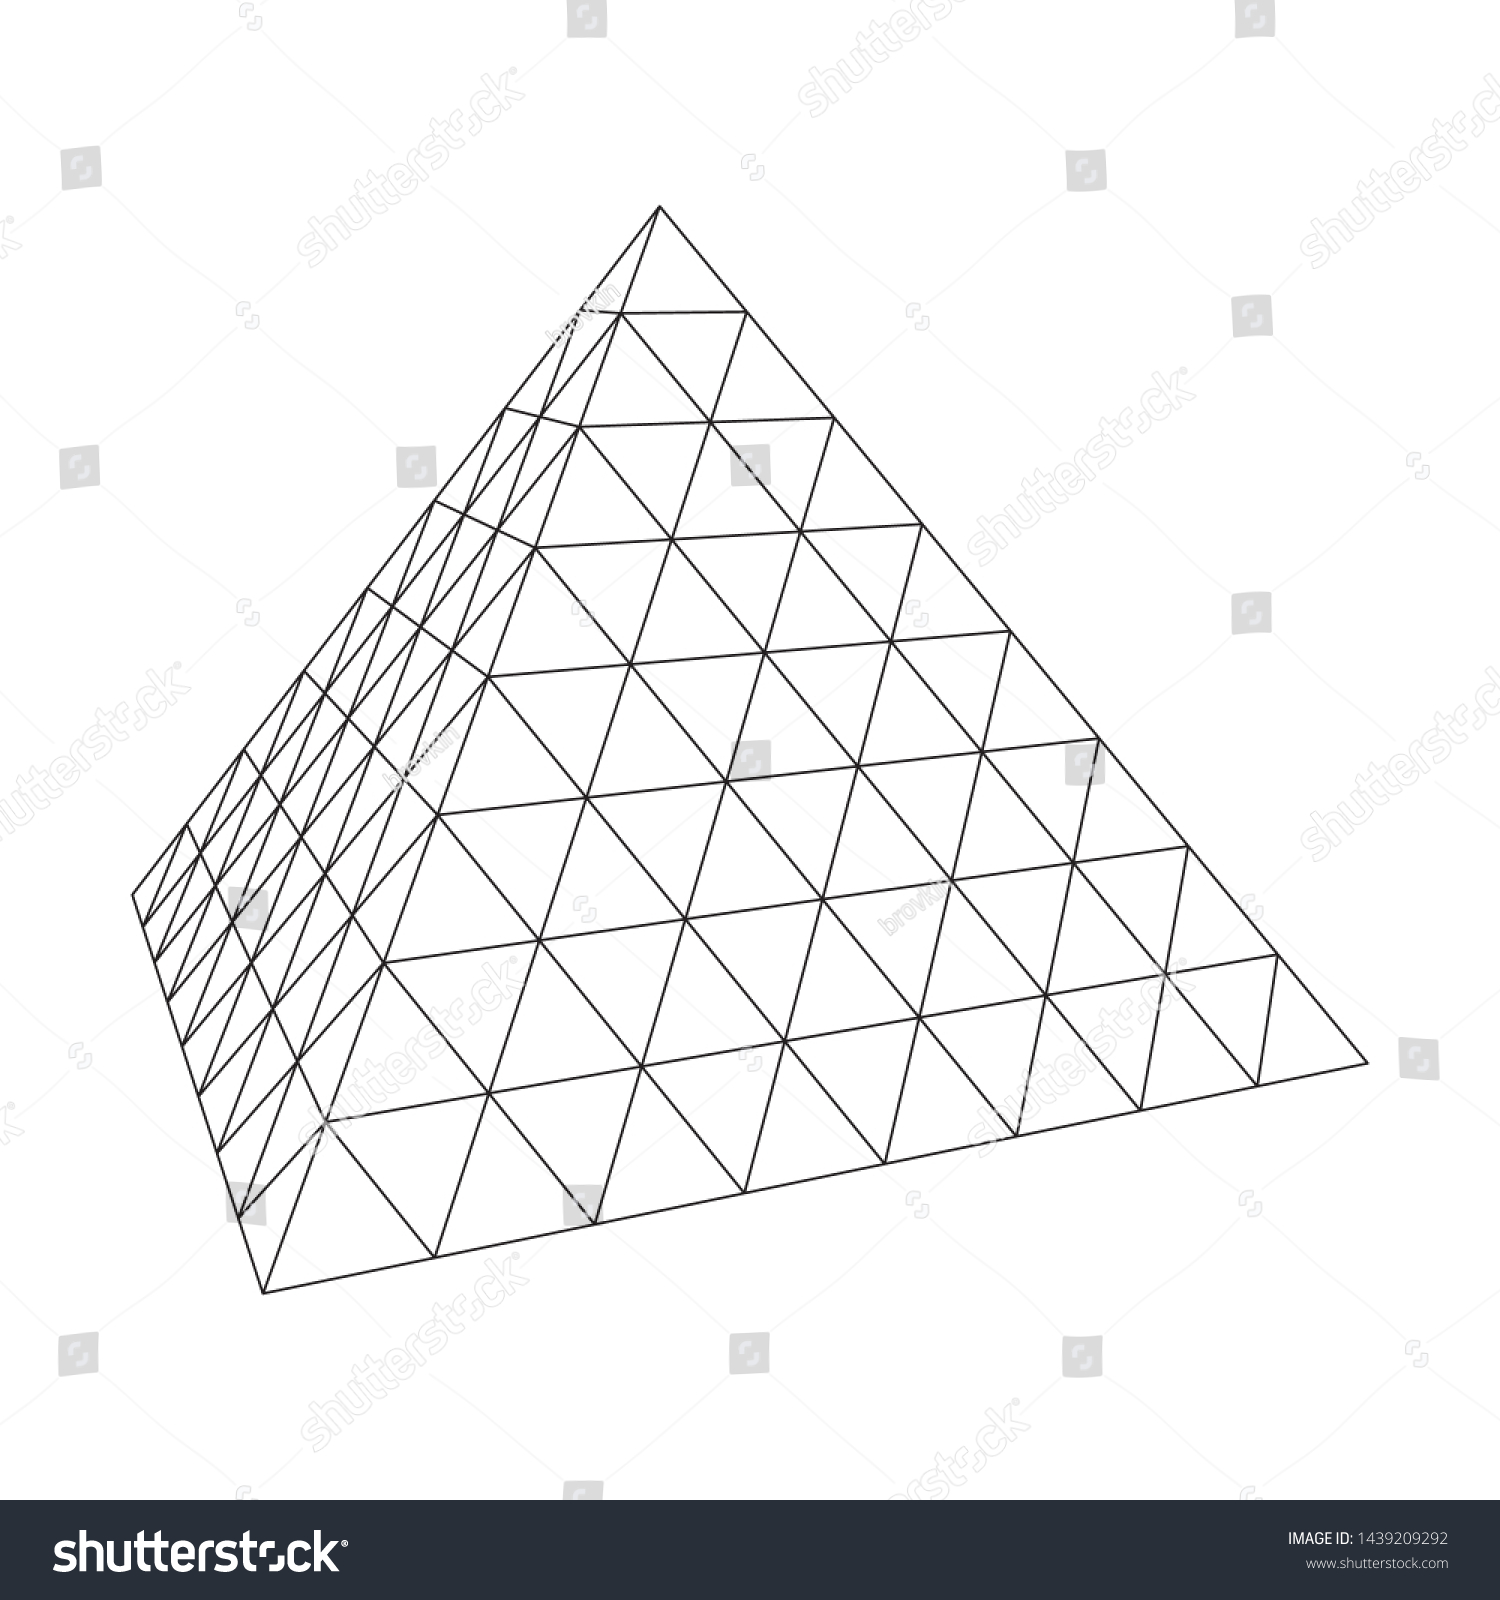 1,159 Wireframe pyramid Images, Stock Photos & Vectors | Shutterstock